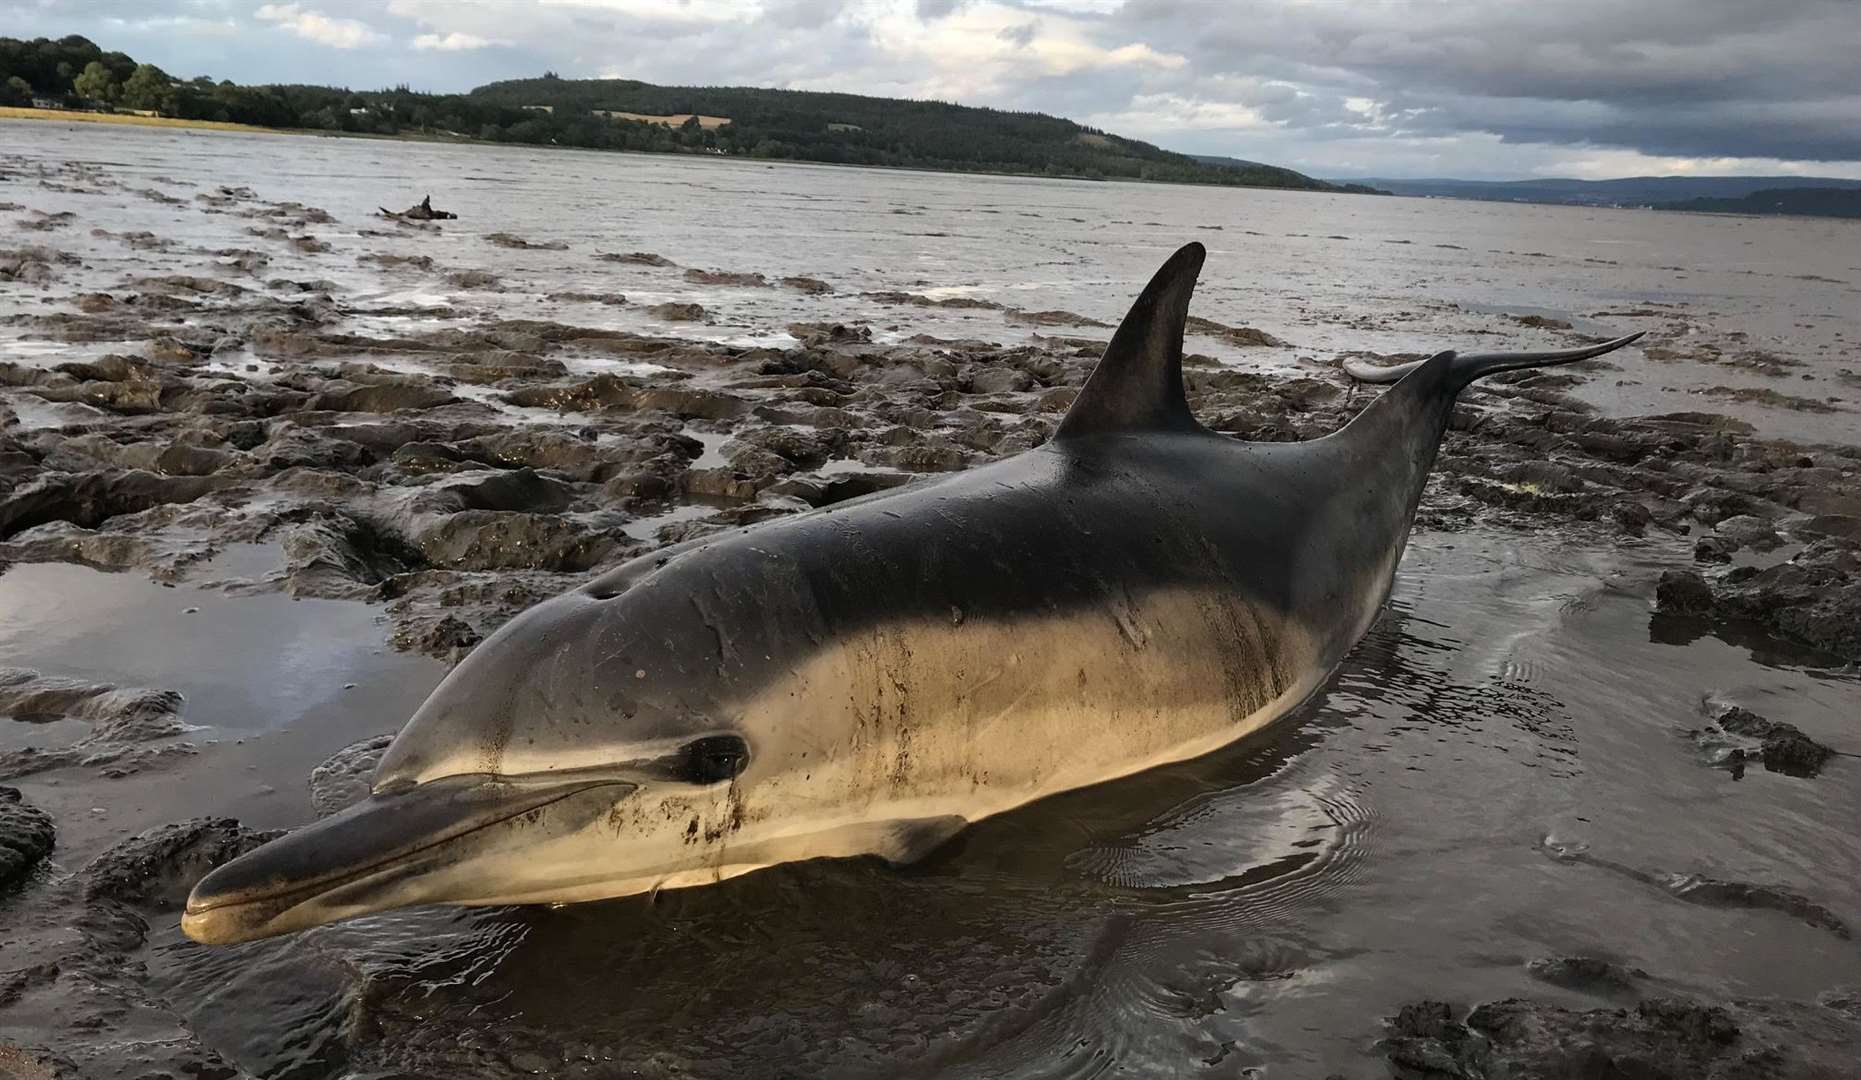 Receding tides left the common dolphin stranded on the mudflats.